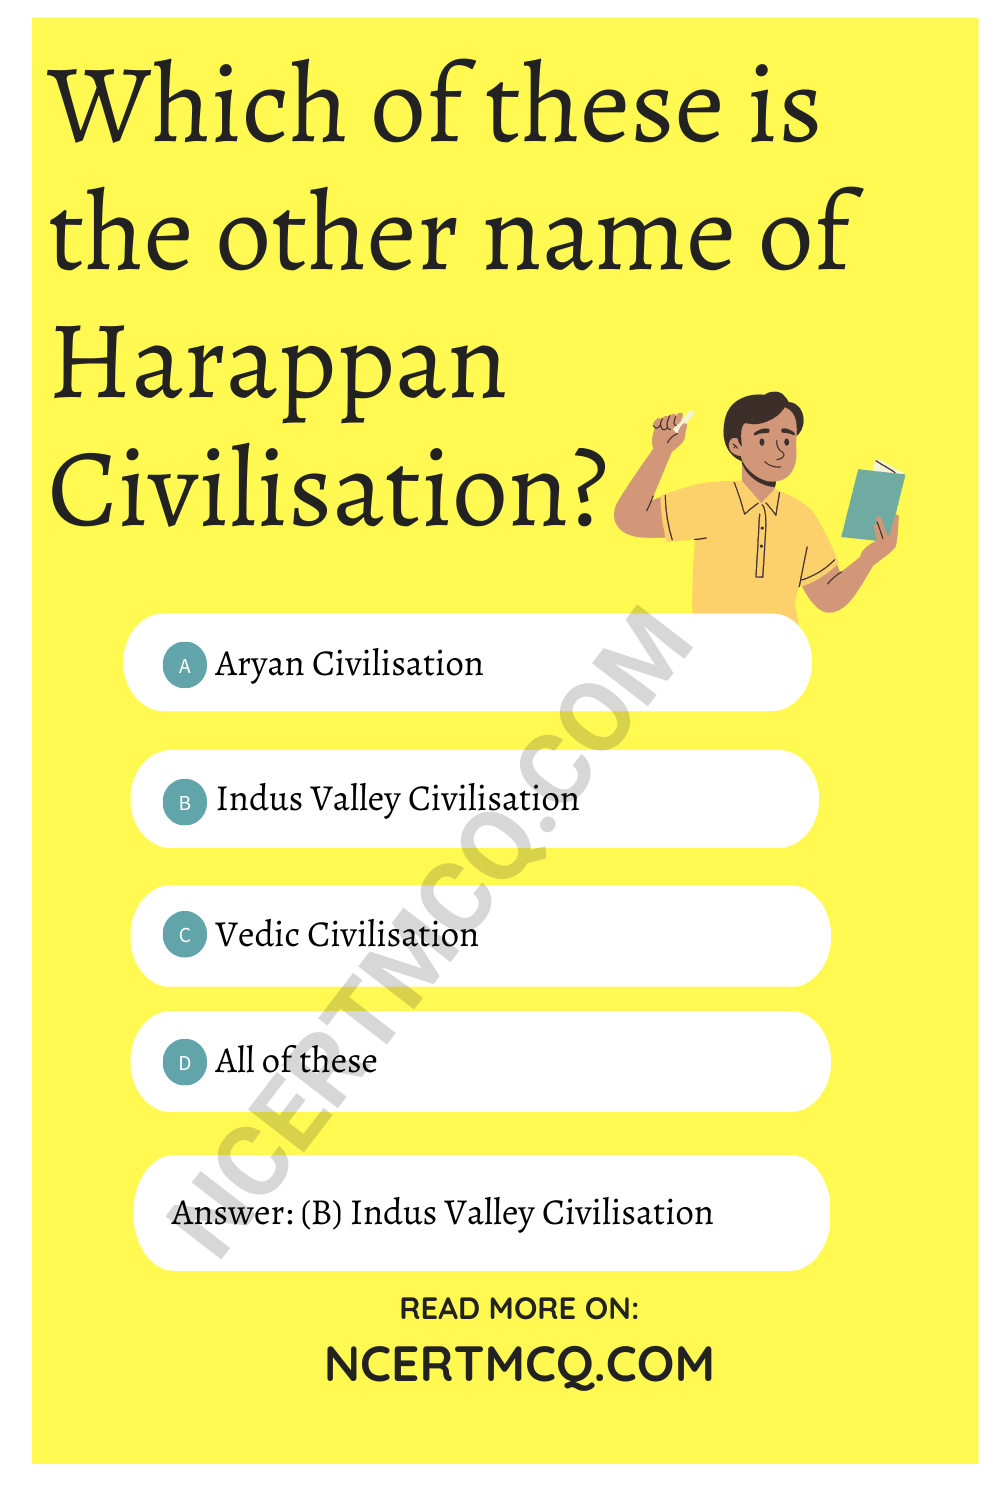 Which of these is the other name of Harappan Civilisation?